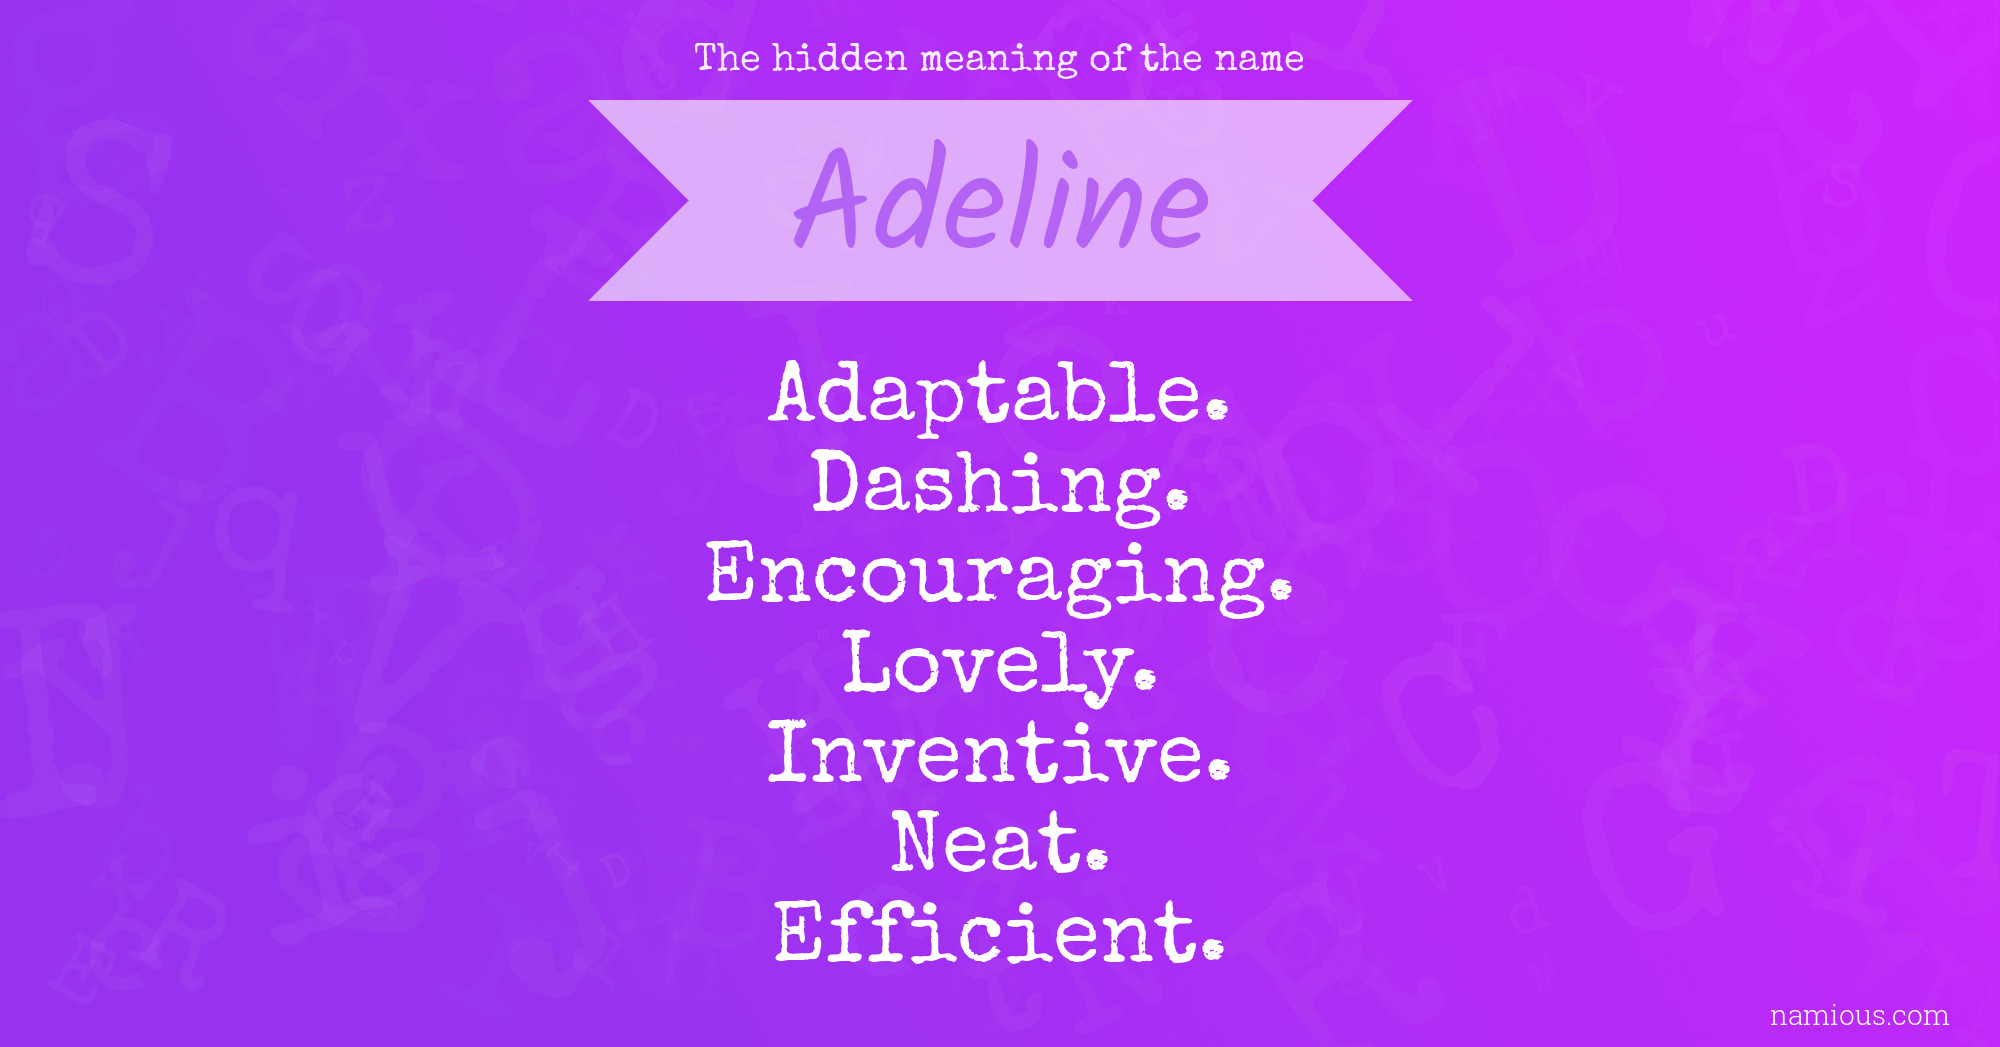 The hidden meaning of the name Adeline